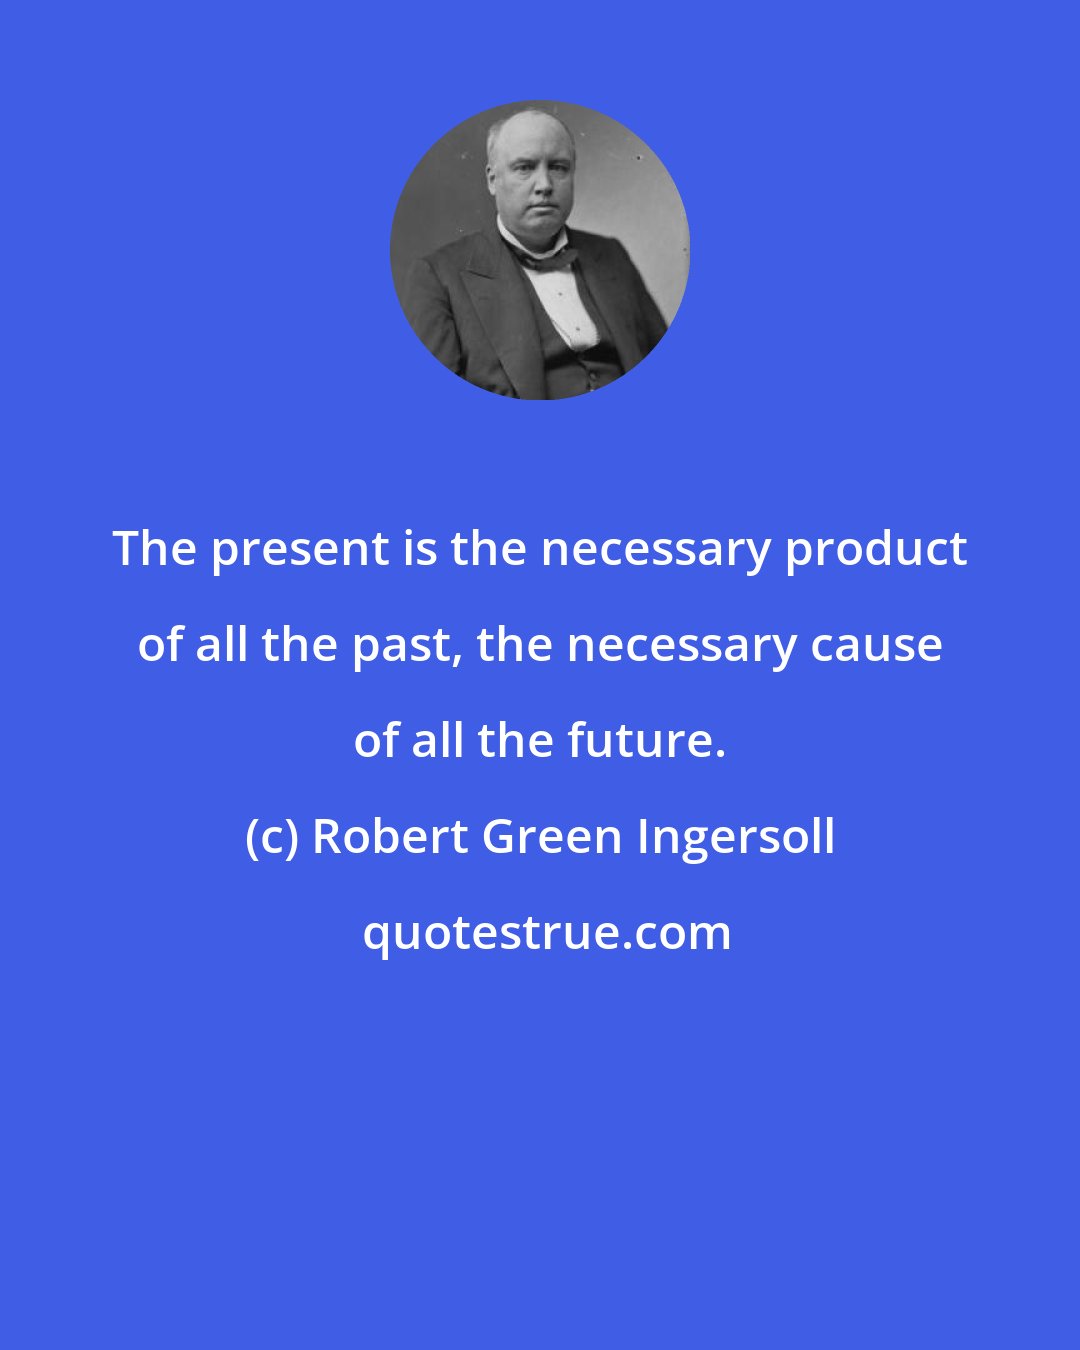 Robert Green Ingersoll: The present is the necessary product of all the past, the necessary cause of all the future.